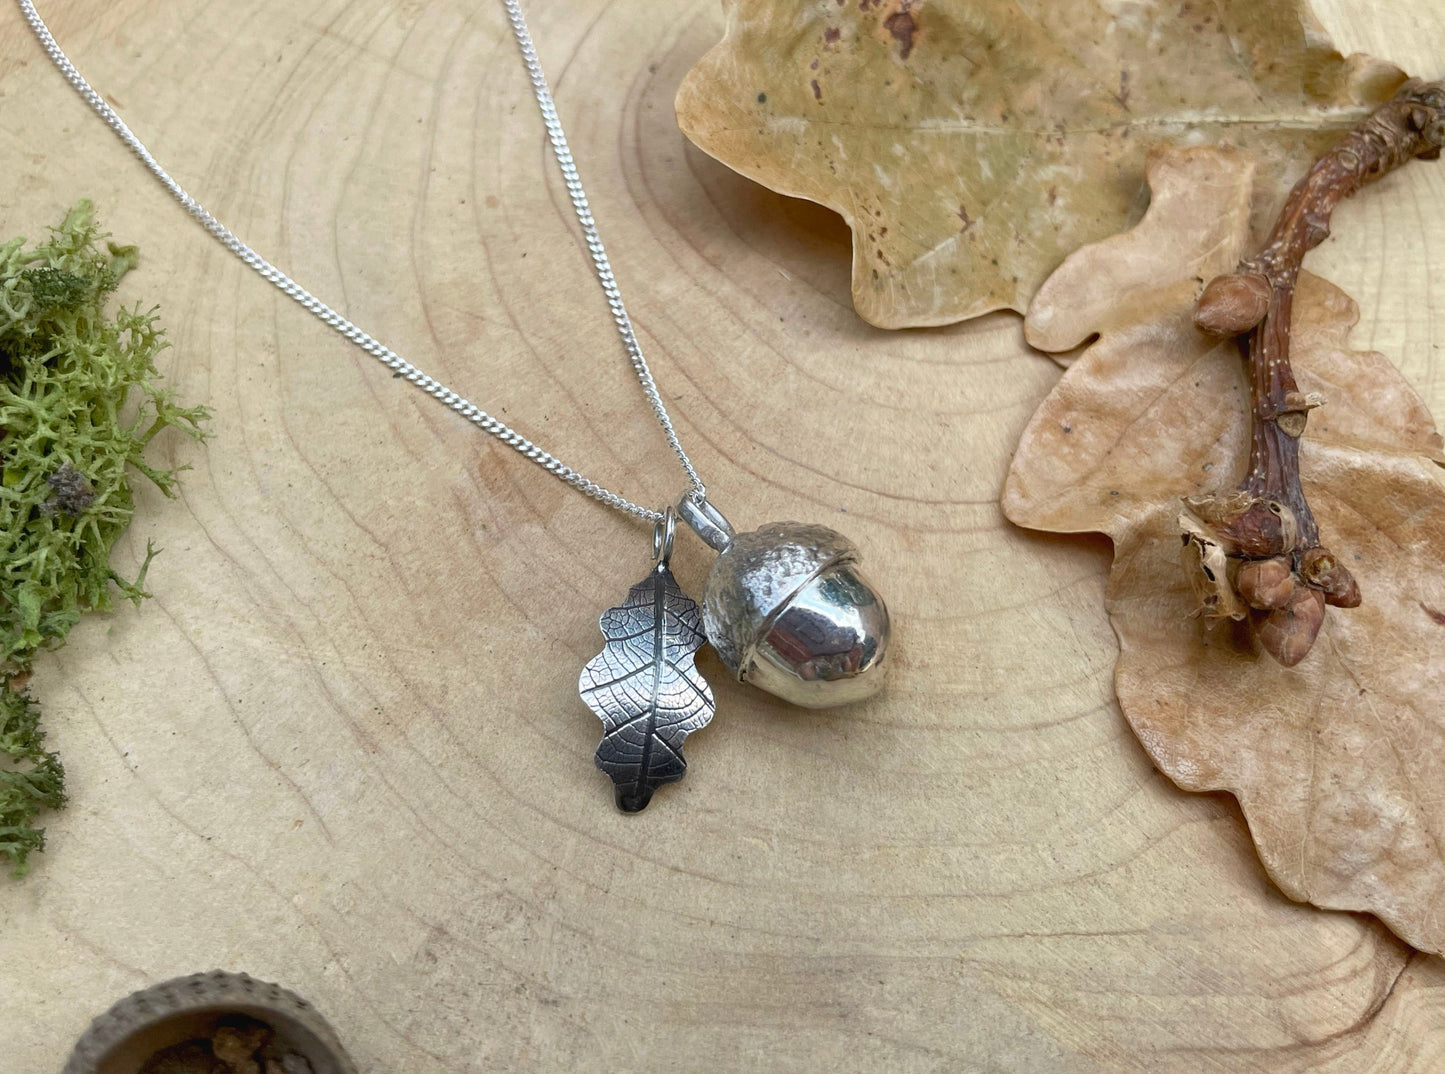 Silver Acorn & Oak Leaf Necklace by Curious Magpie Jewellery